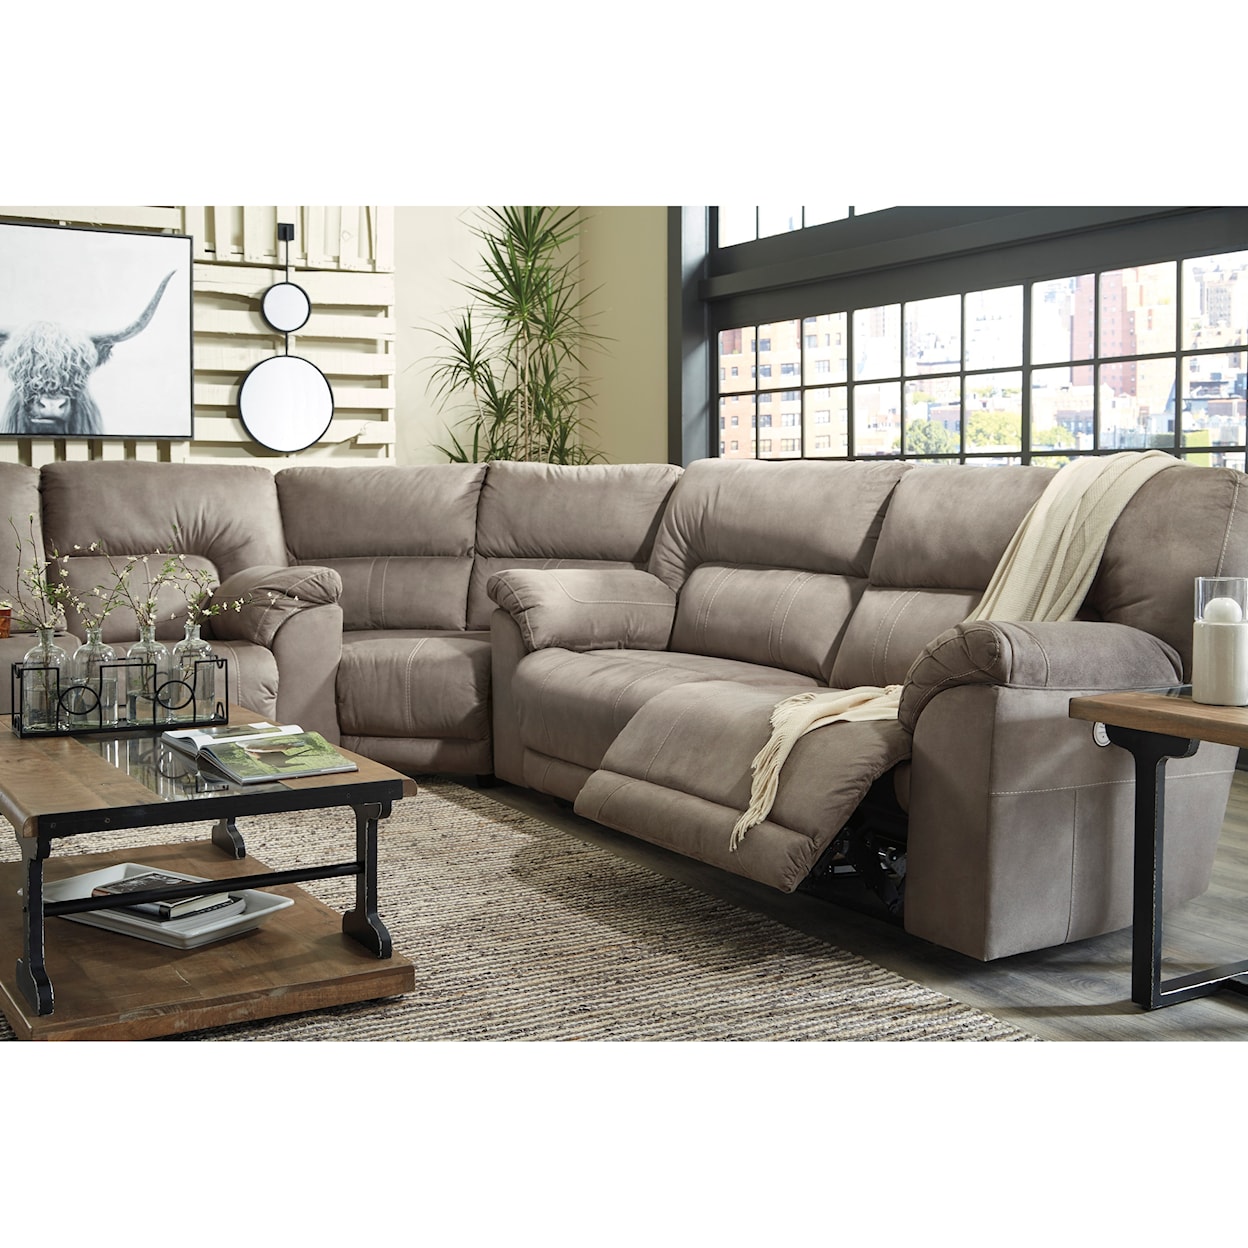 Ashley Furniture Benchcraft Cavalcade Power Reclining Sectional